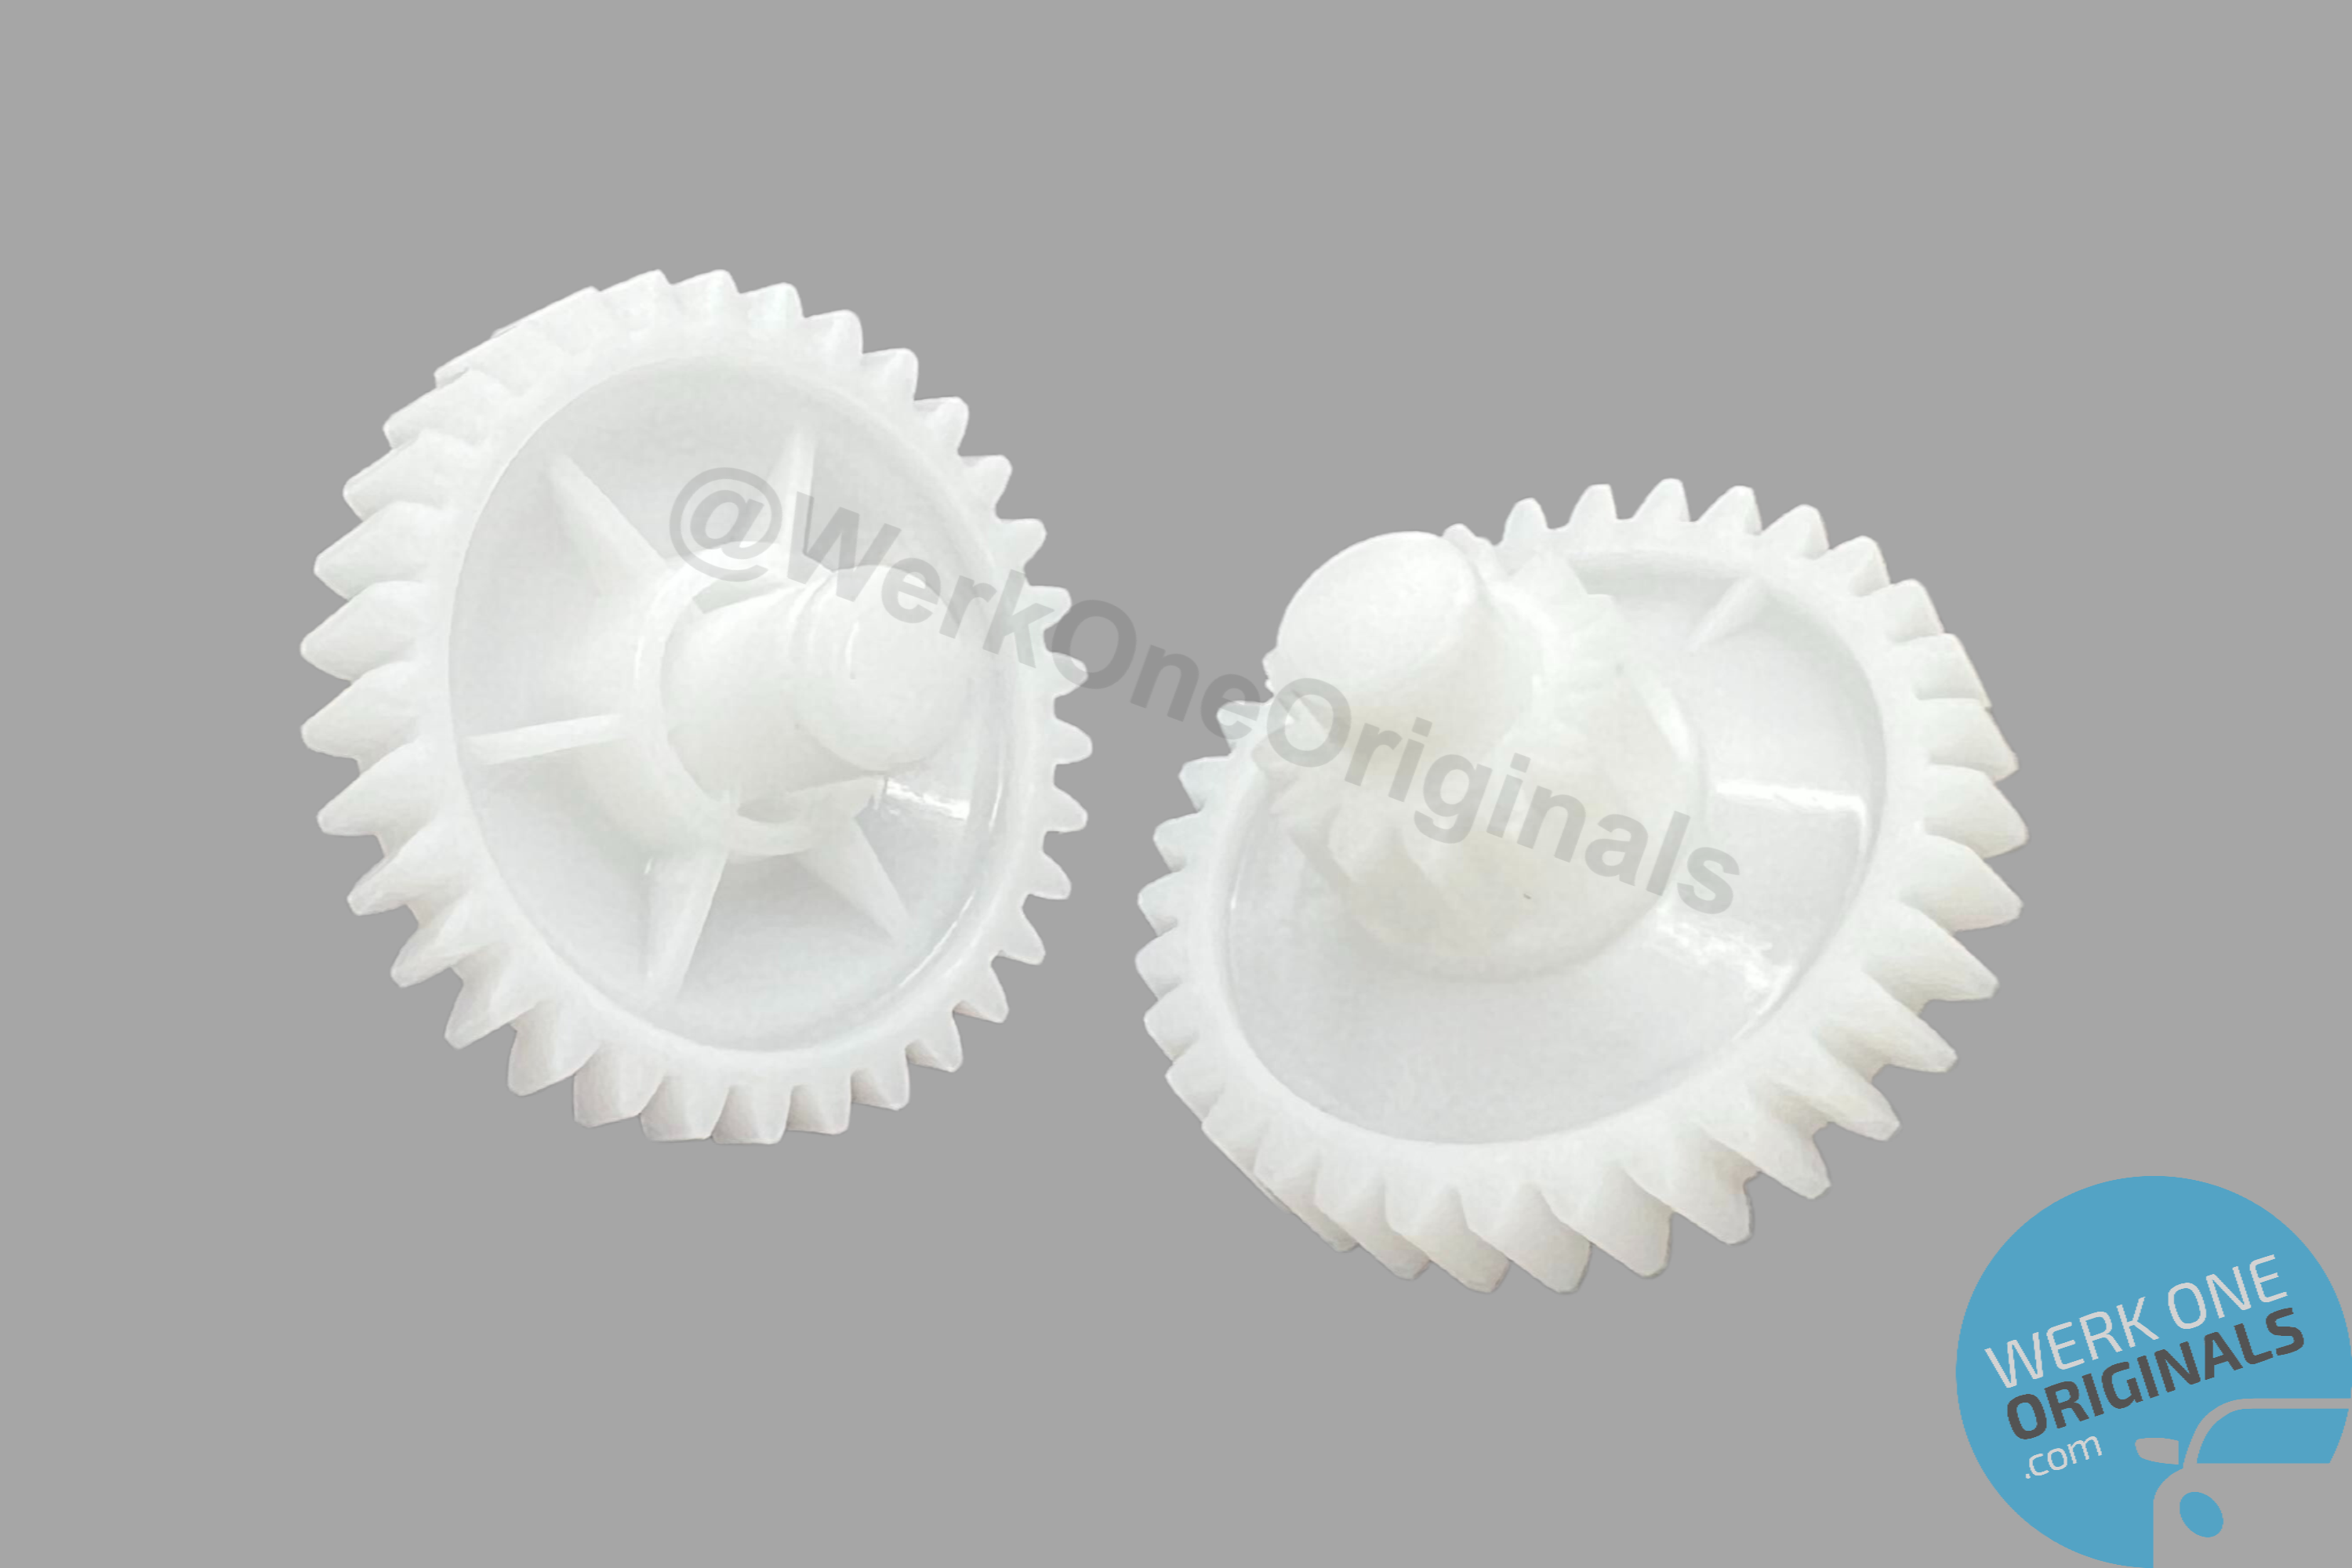 Porsche Genuine Replacement Sunroof Drive Gears x2 for 924S Models